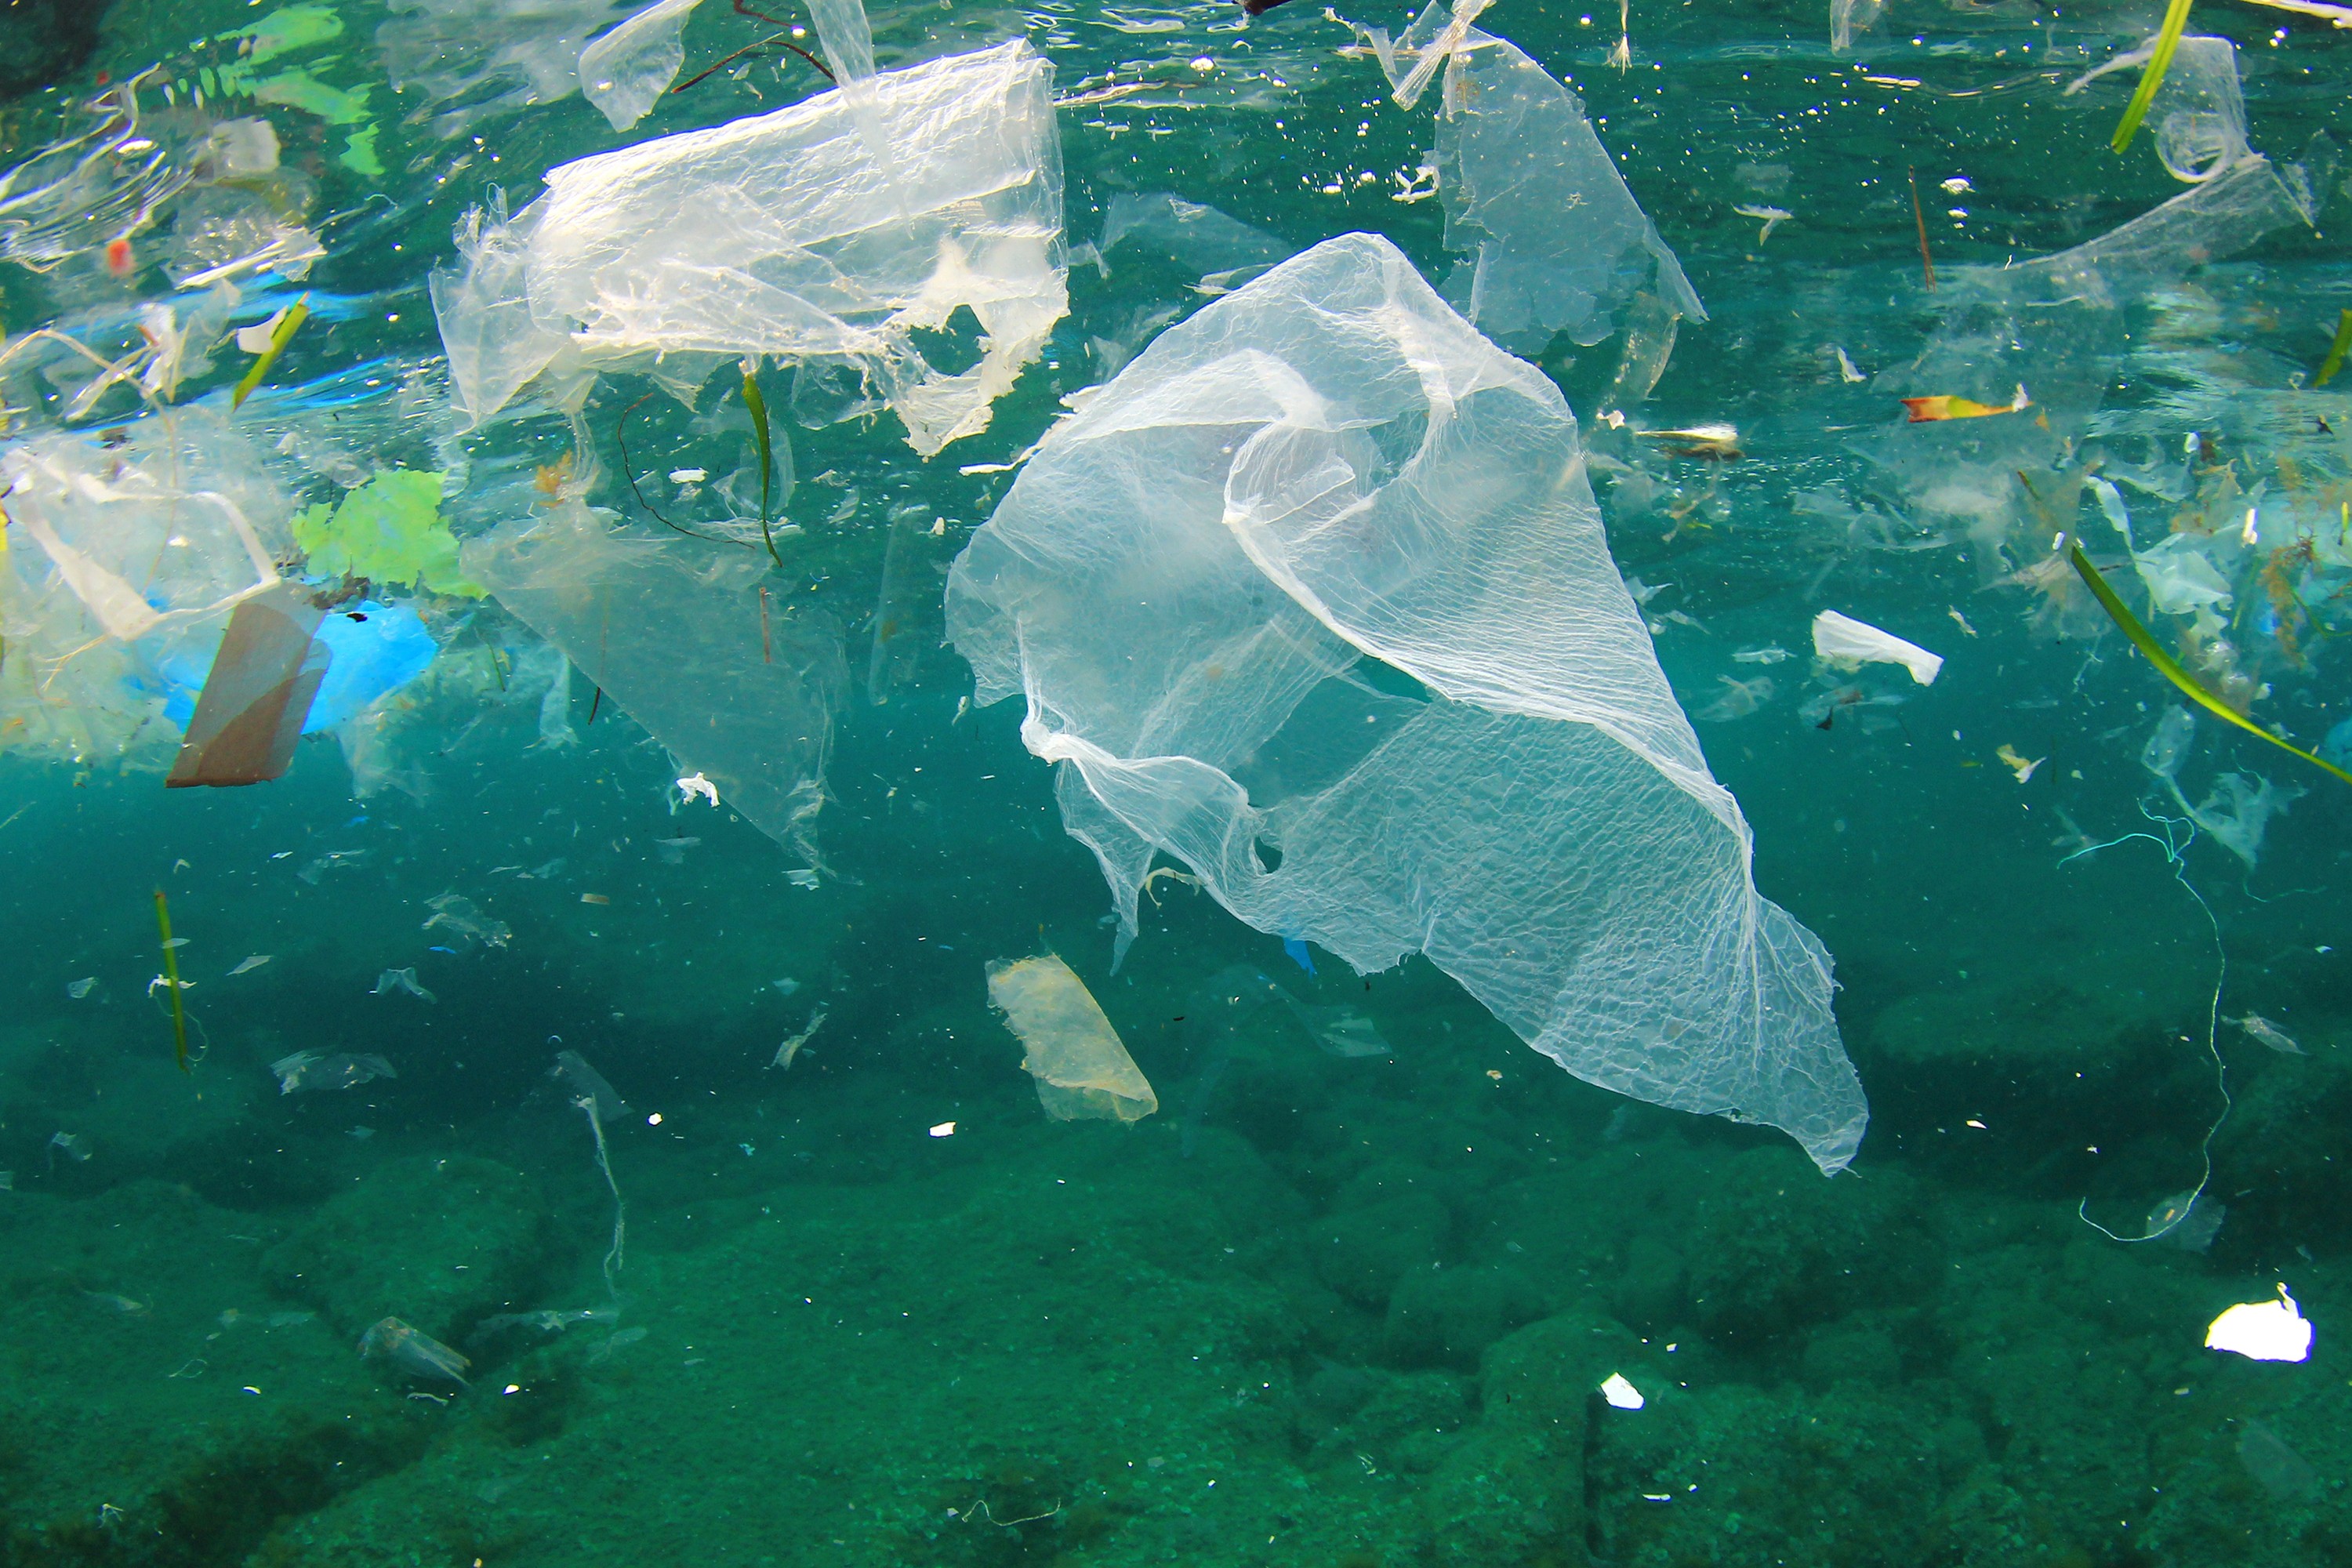 An Ellen MacArthur Foundation Report estimates that, by 2050, there will be more plastic in the ocean than fish if current trends continue. Photo: Shutterstock